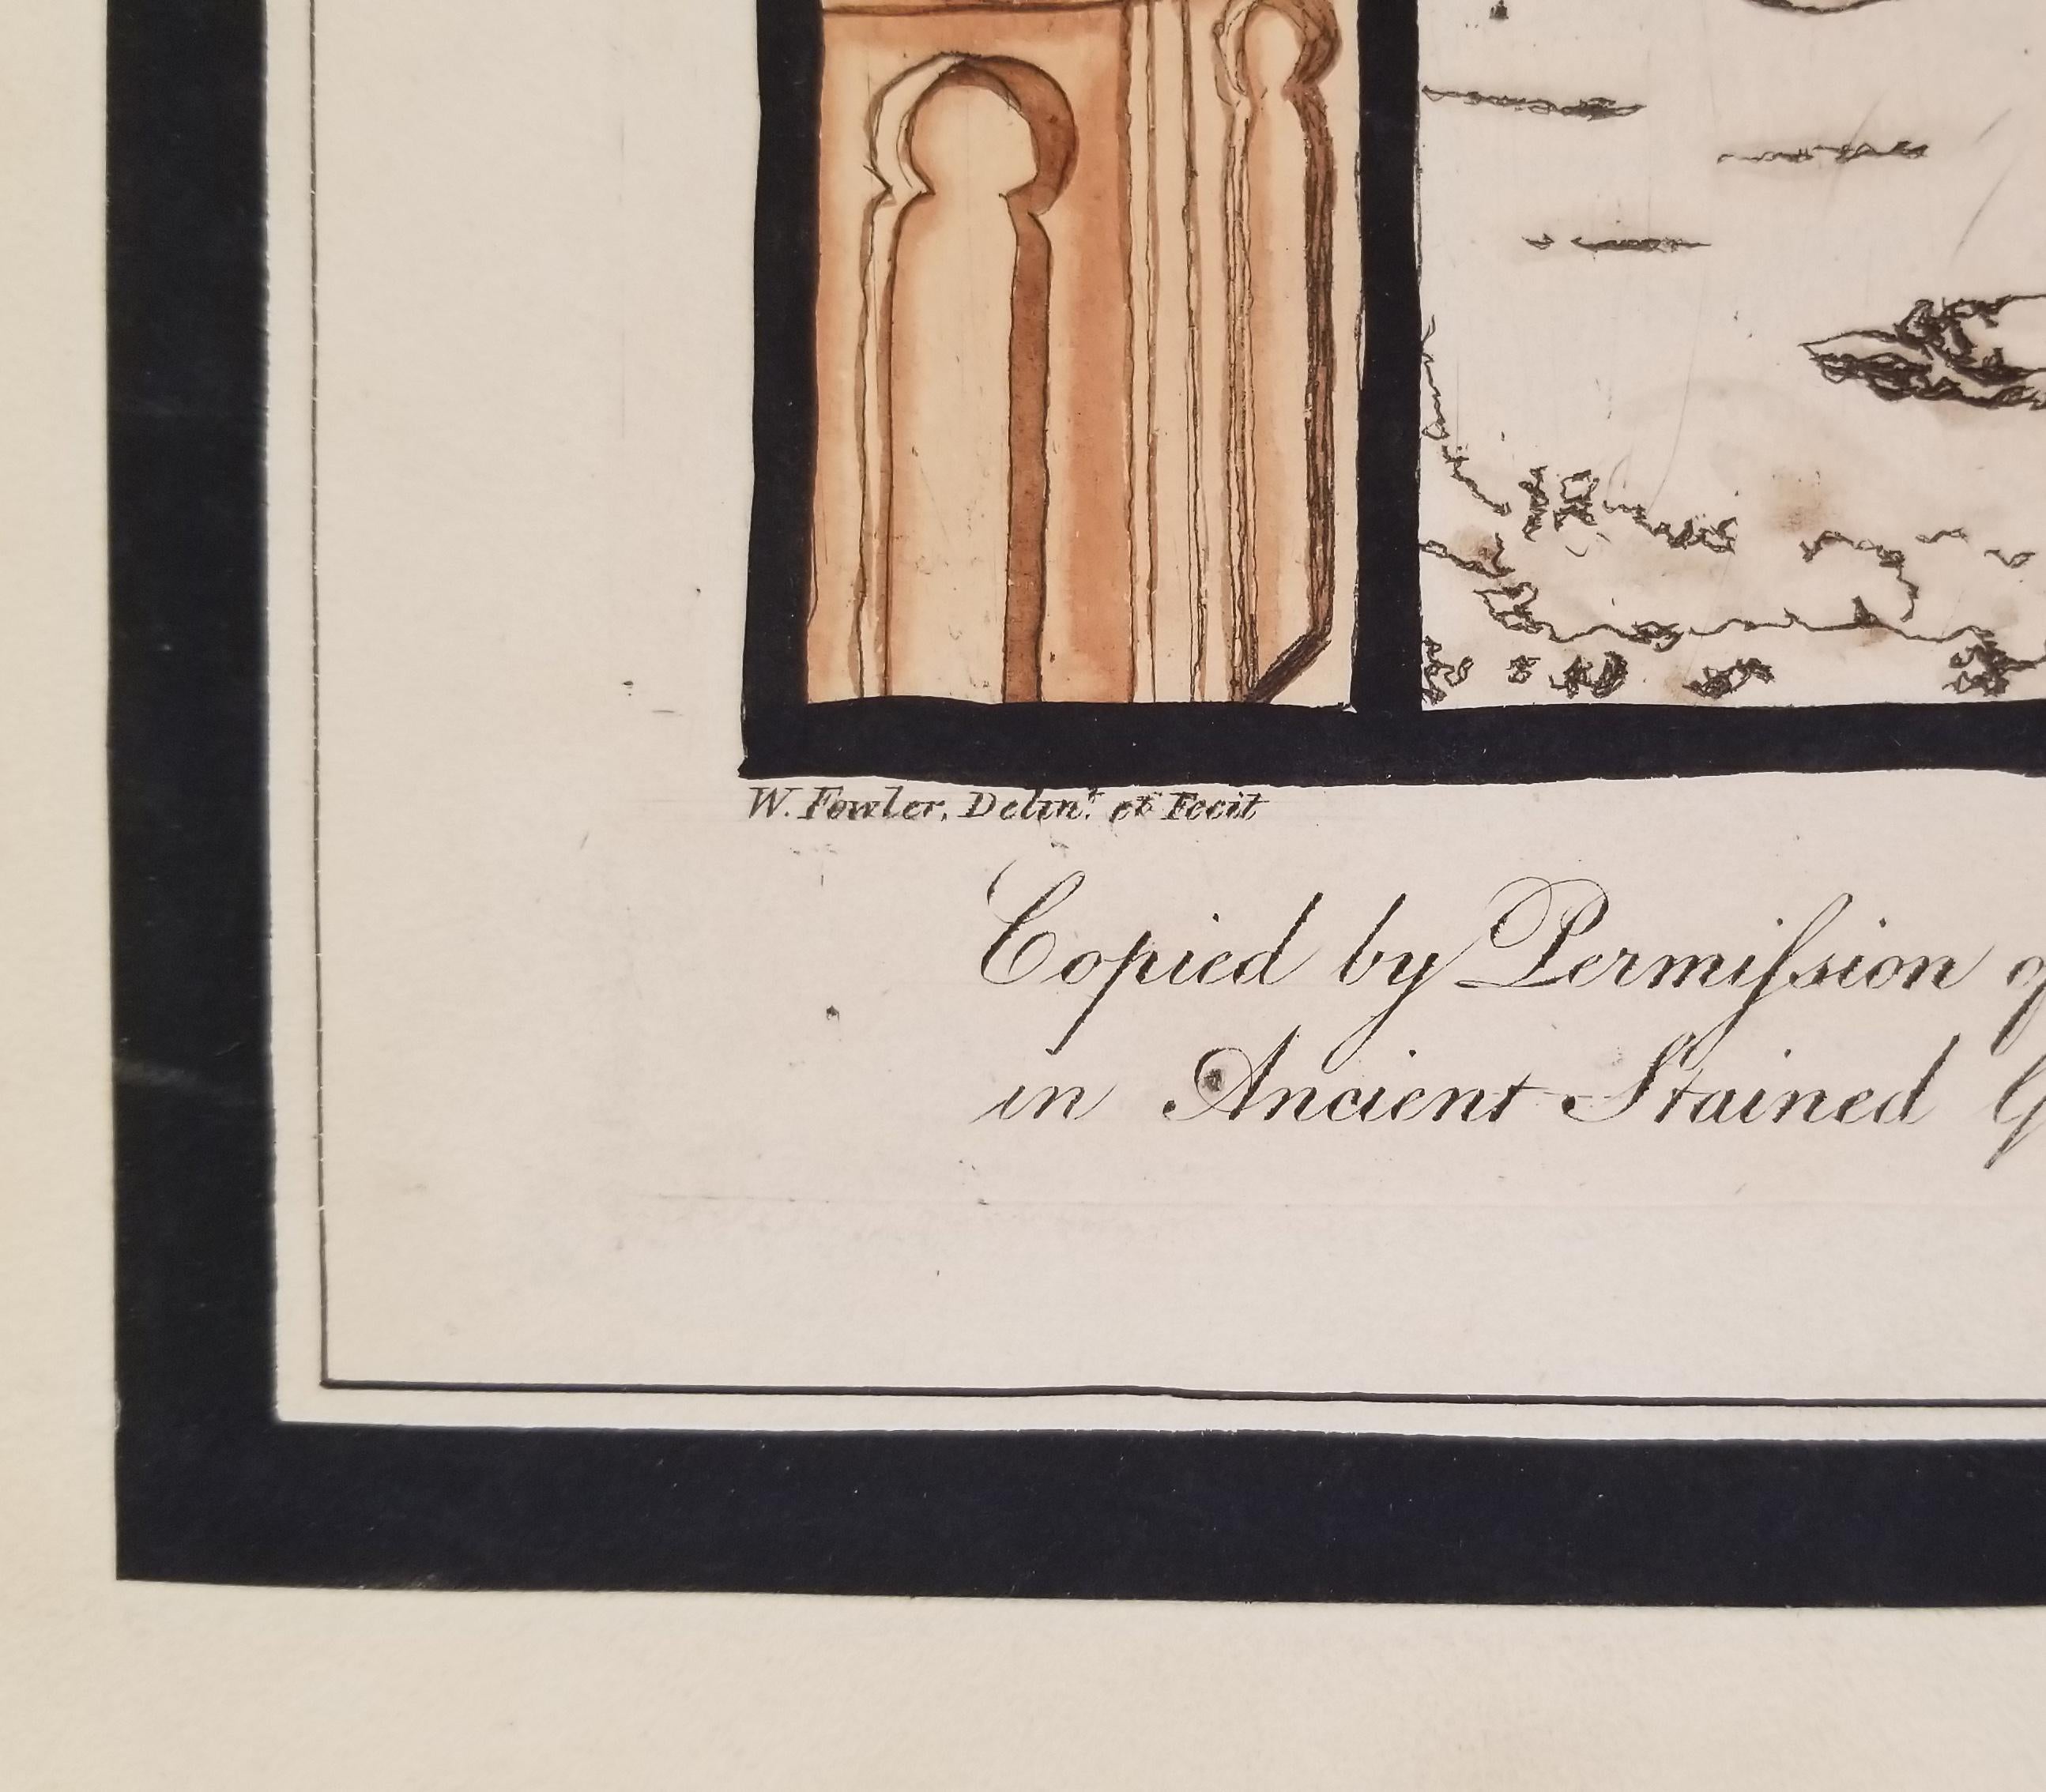 Original hand-colored engraving, engraved and published by William Fowler in 1805 depicting i stained glass in the the death of St. John The Baptist.  The title reads: 